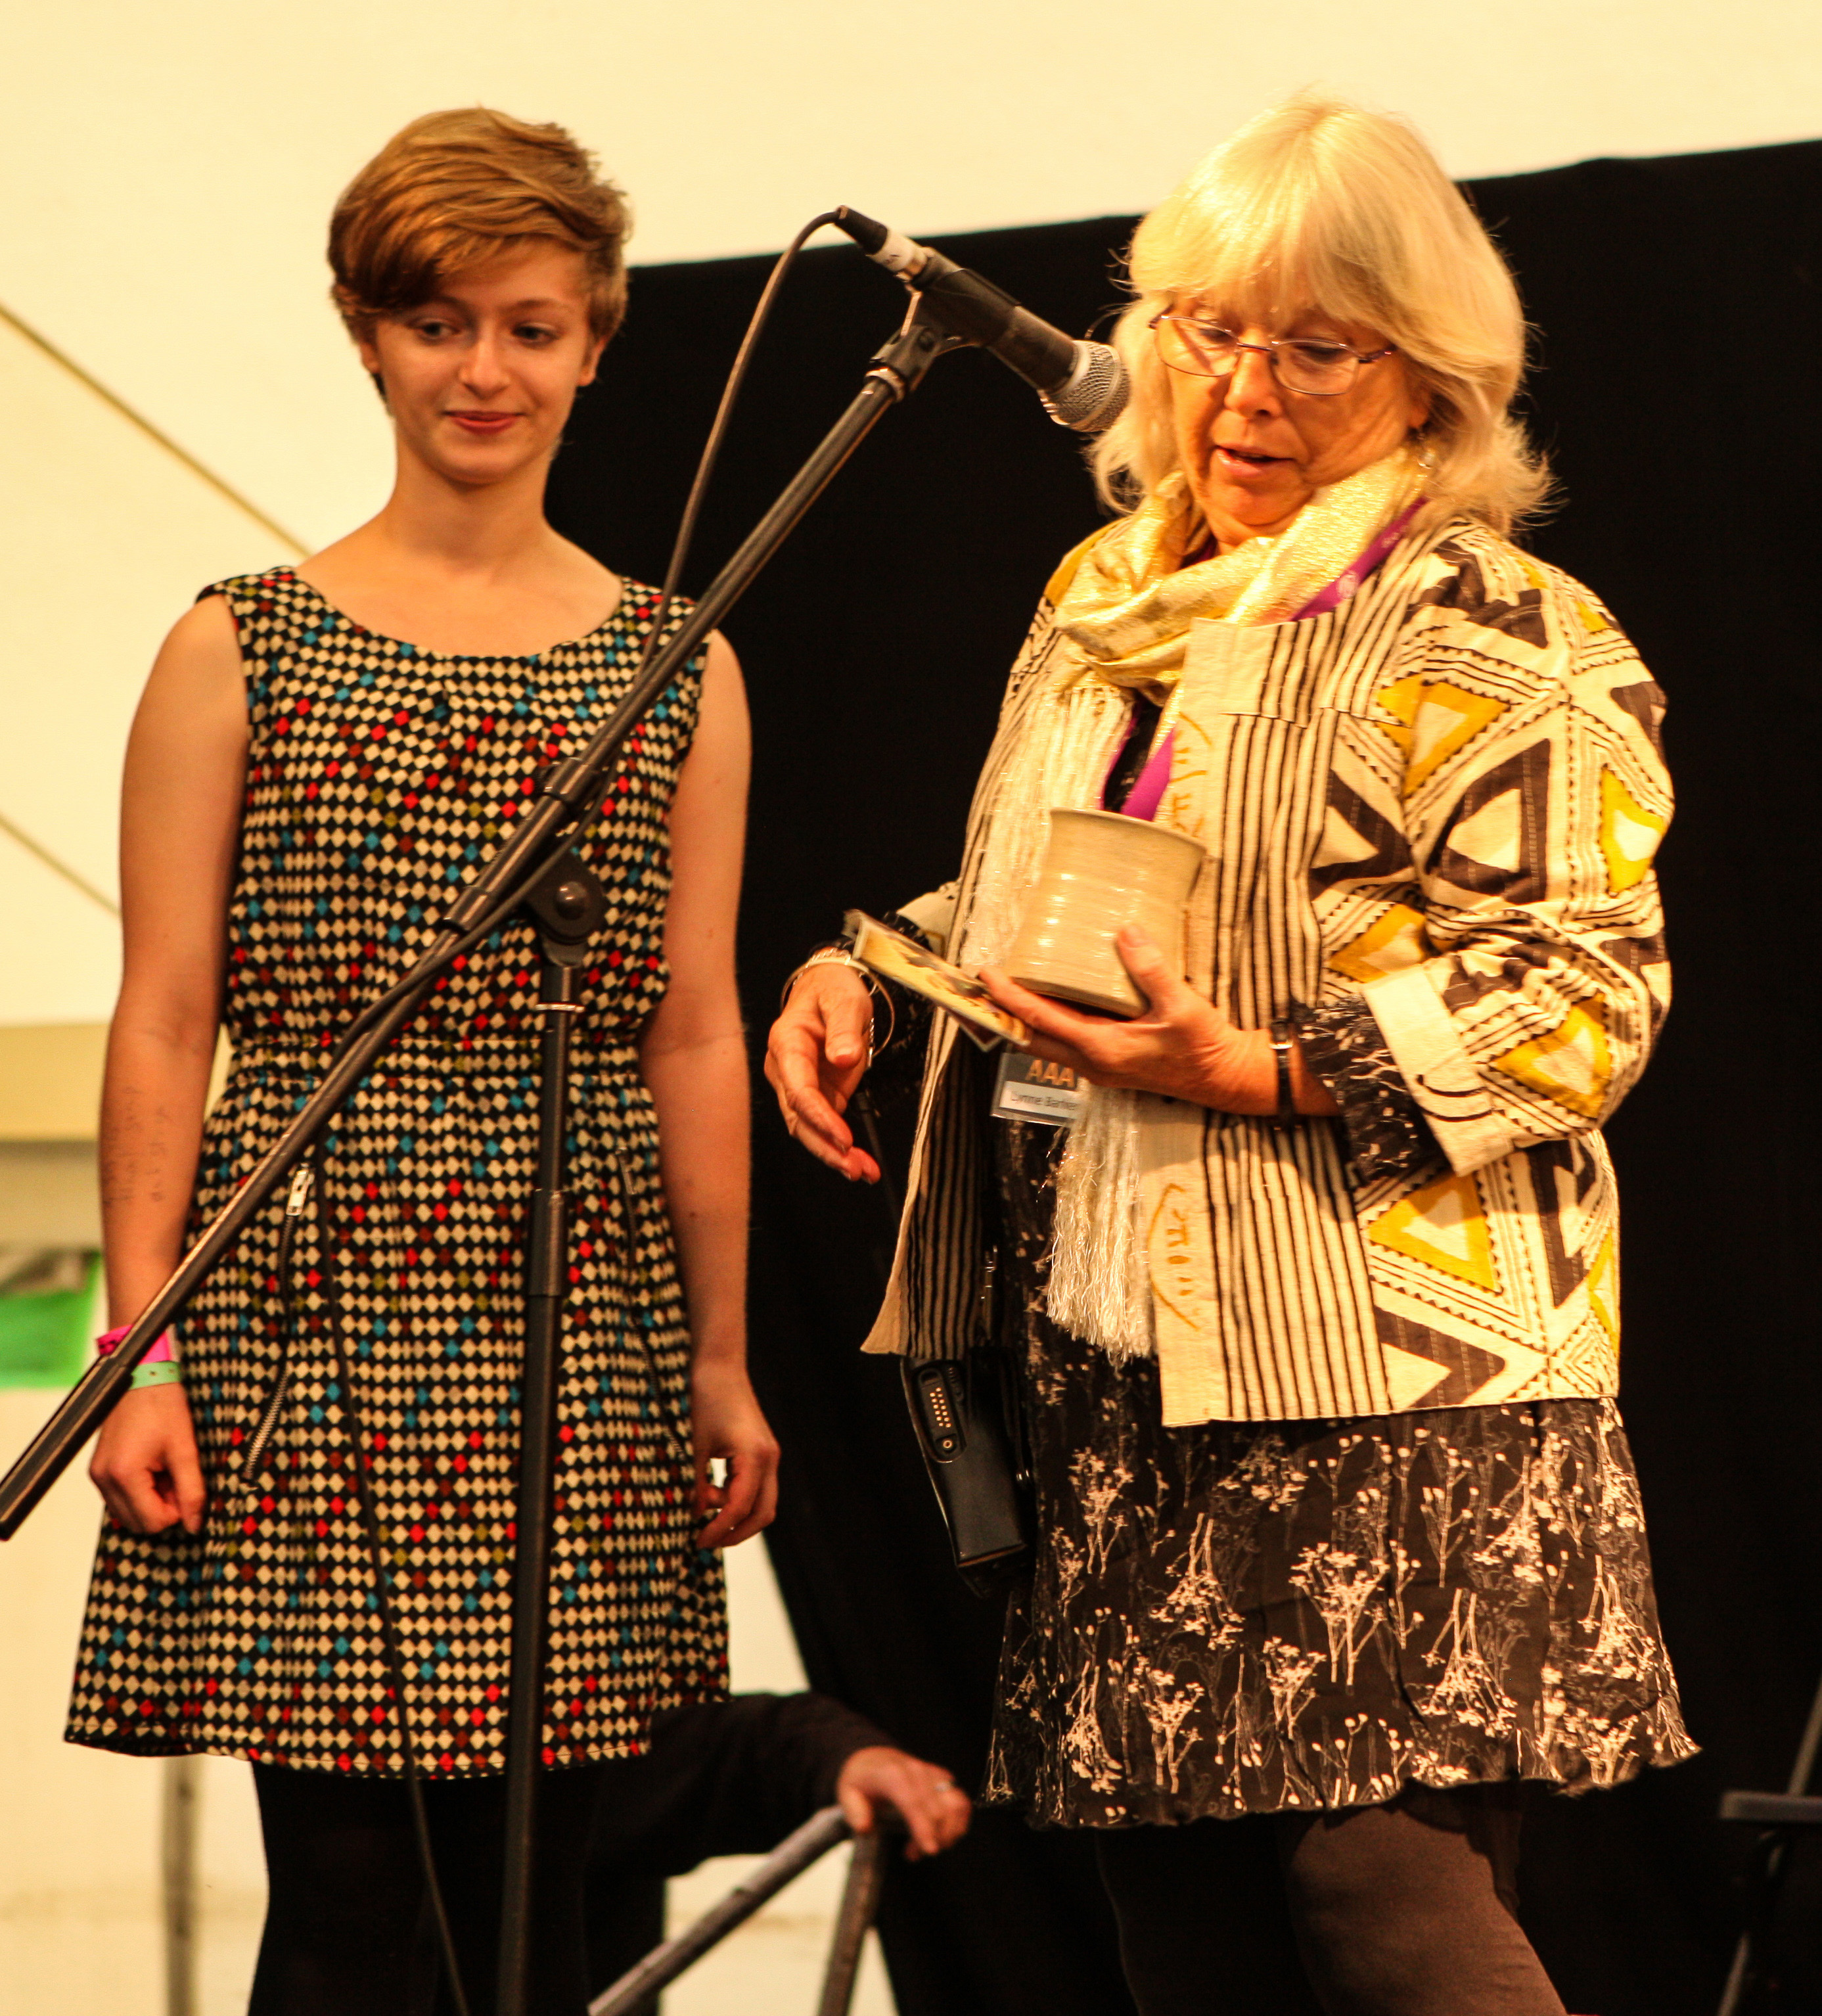 Molly Pipe being presented with the Future of Young Folk Award at Bromyard Folk Festival by director Lynne Barker. Photograph by Lightsmiths Photography.